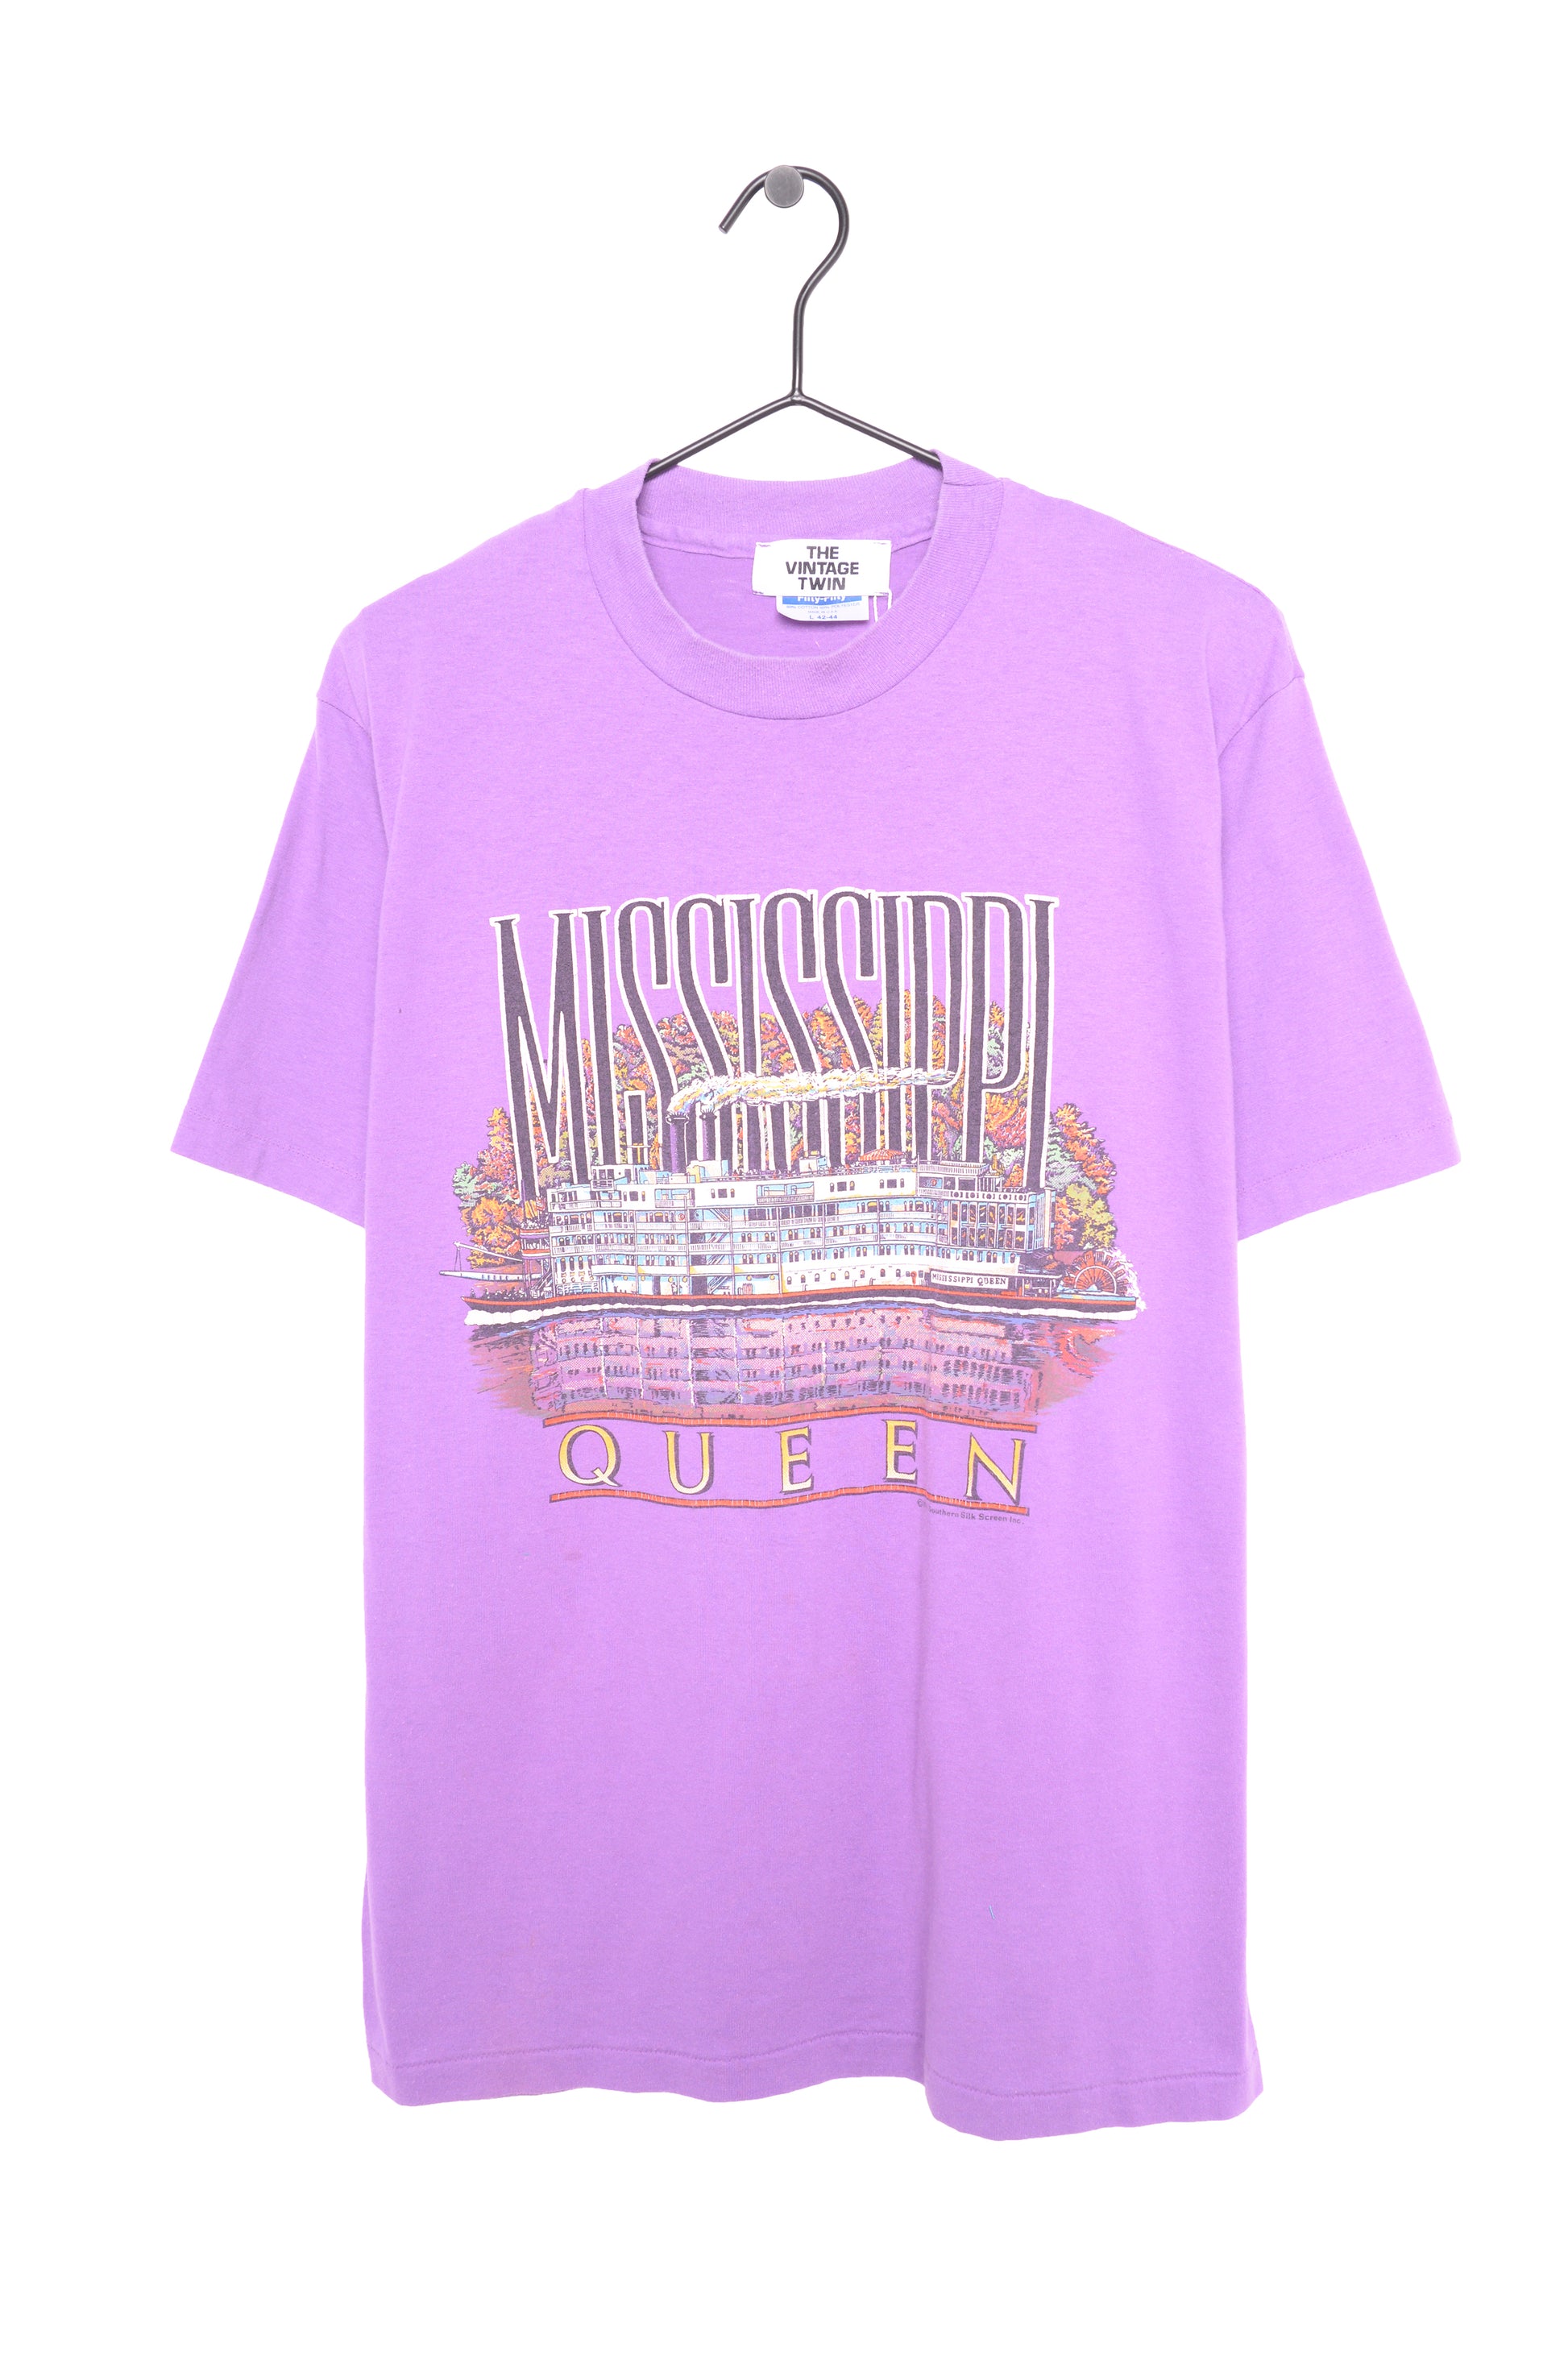 1989 Faded Mississippi Queen Tee USA – The Vintage Twin